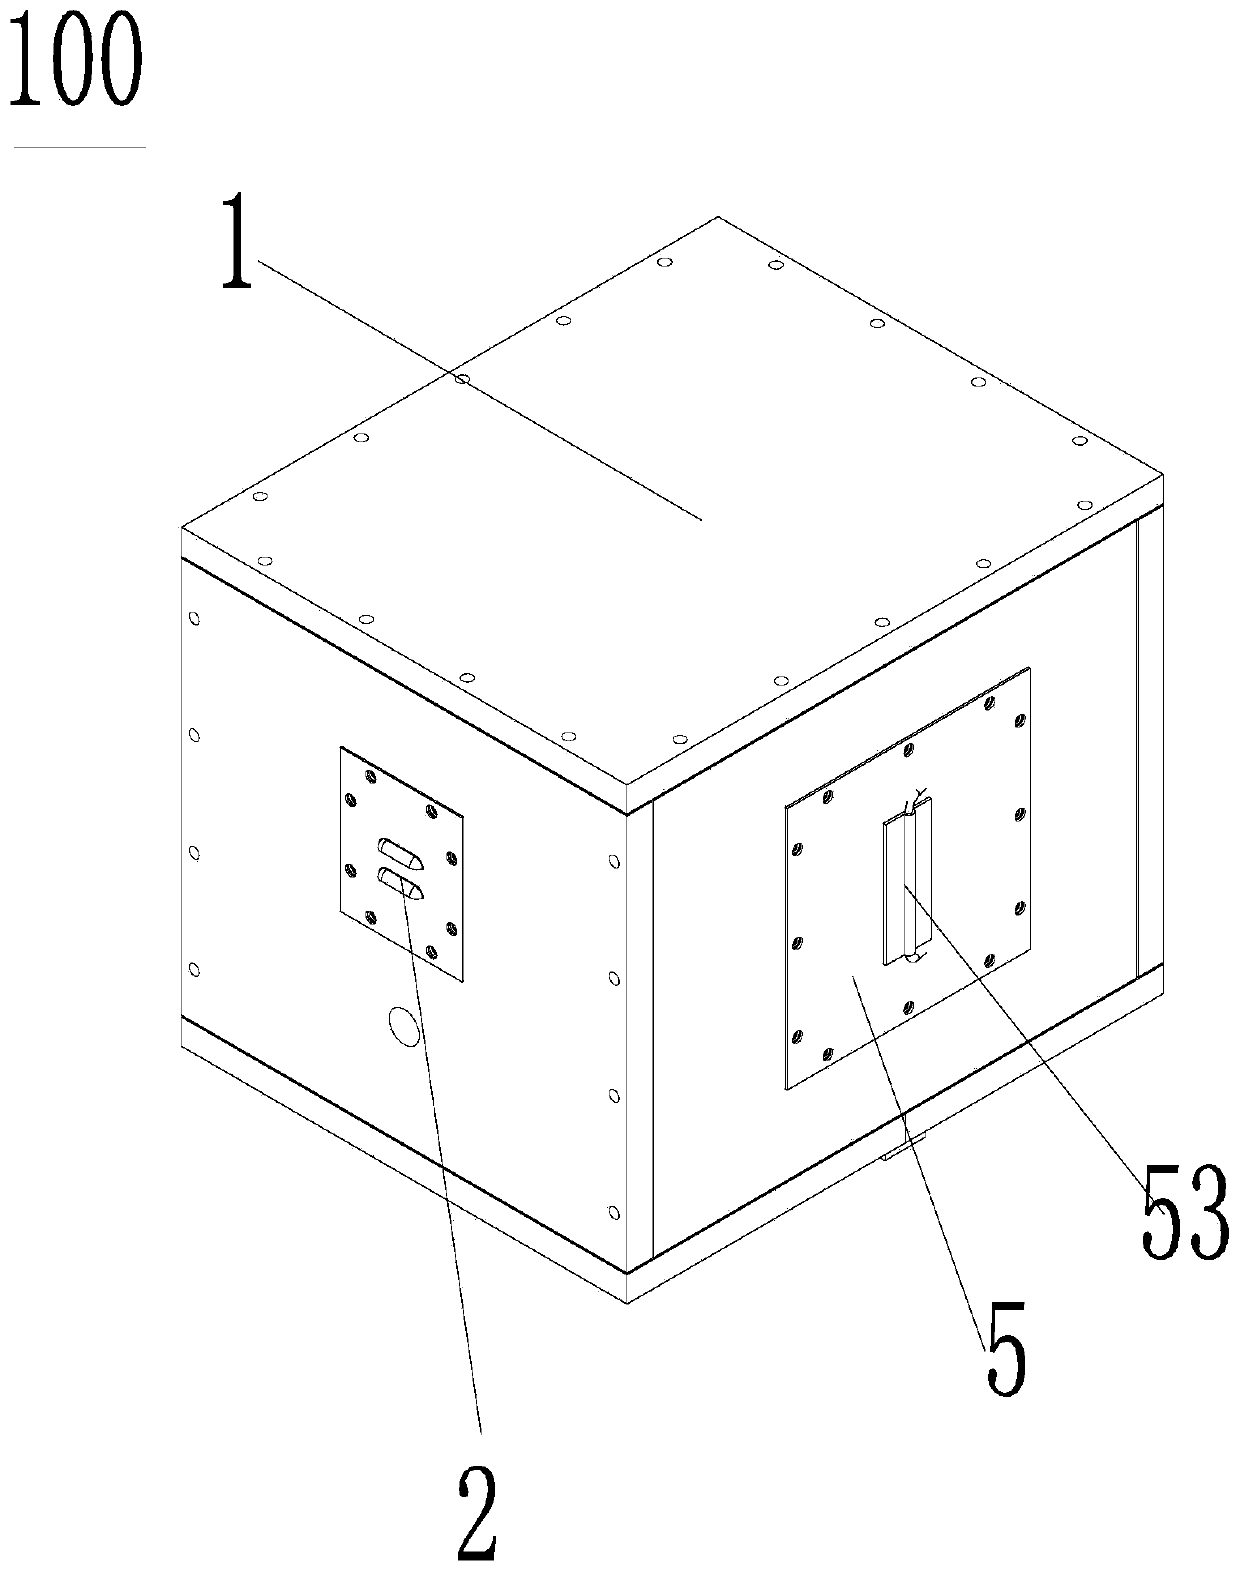 High-sealing mechanism applied to box/cover